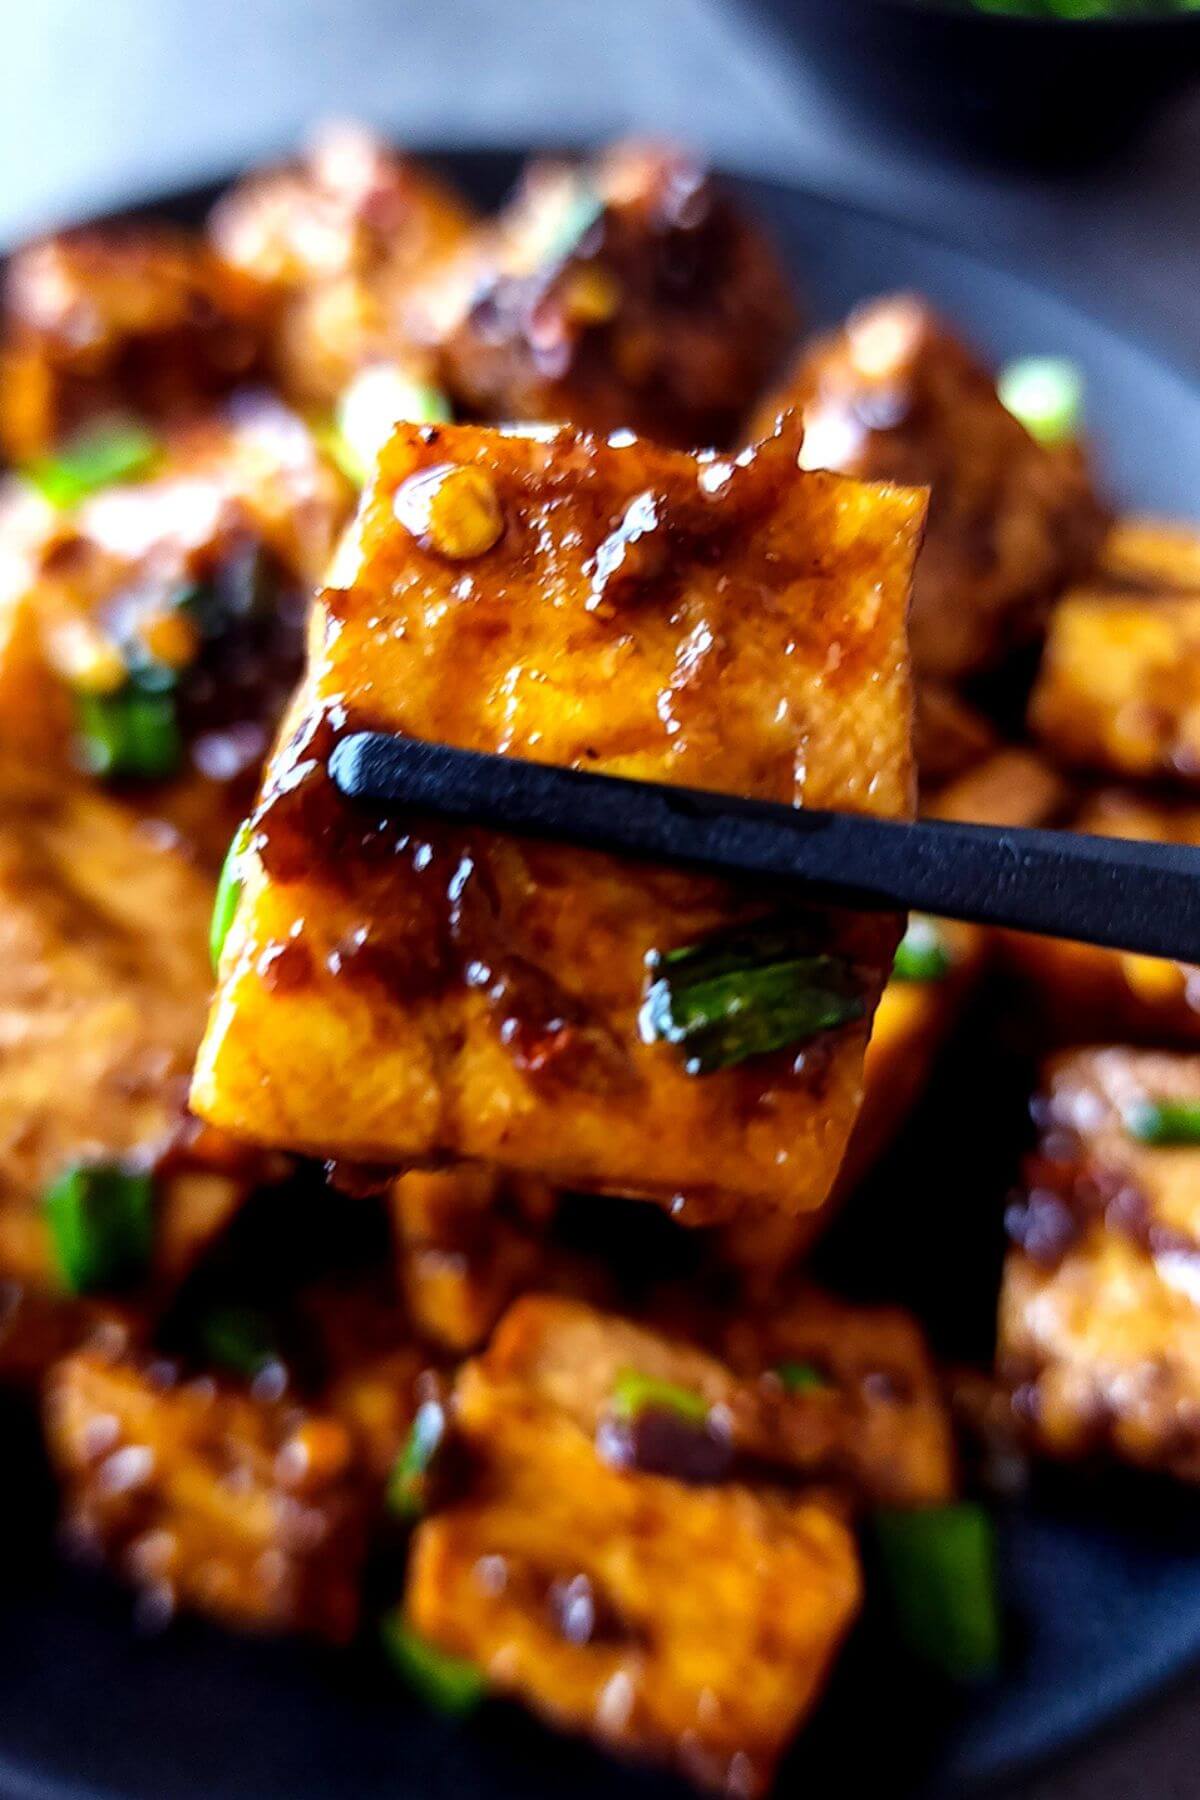 A tofu cube picked up with chopsticks over a plate of chili garlic tofu